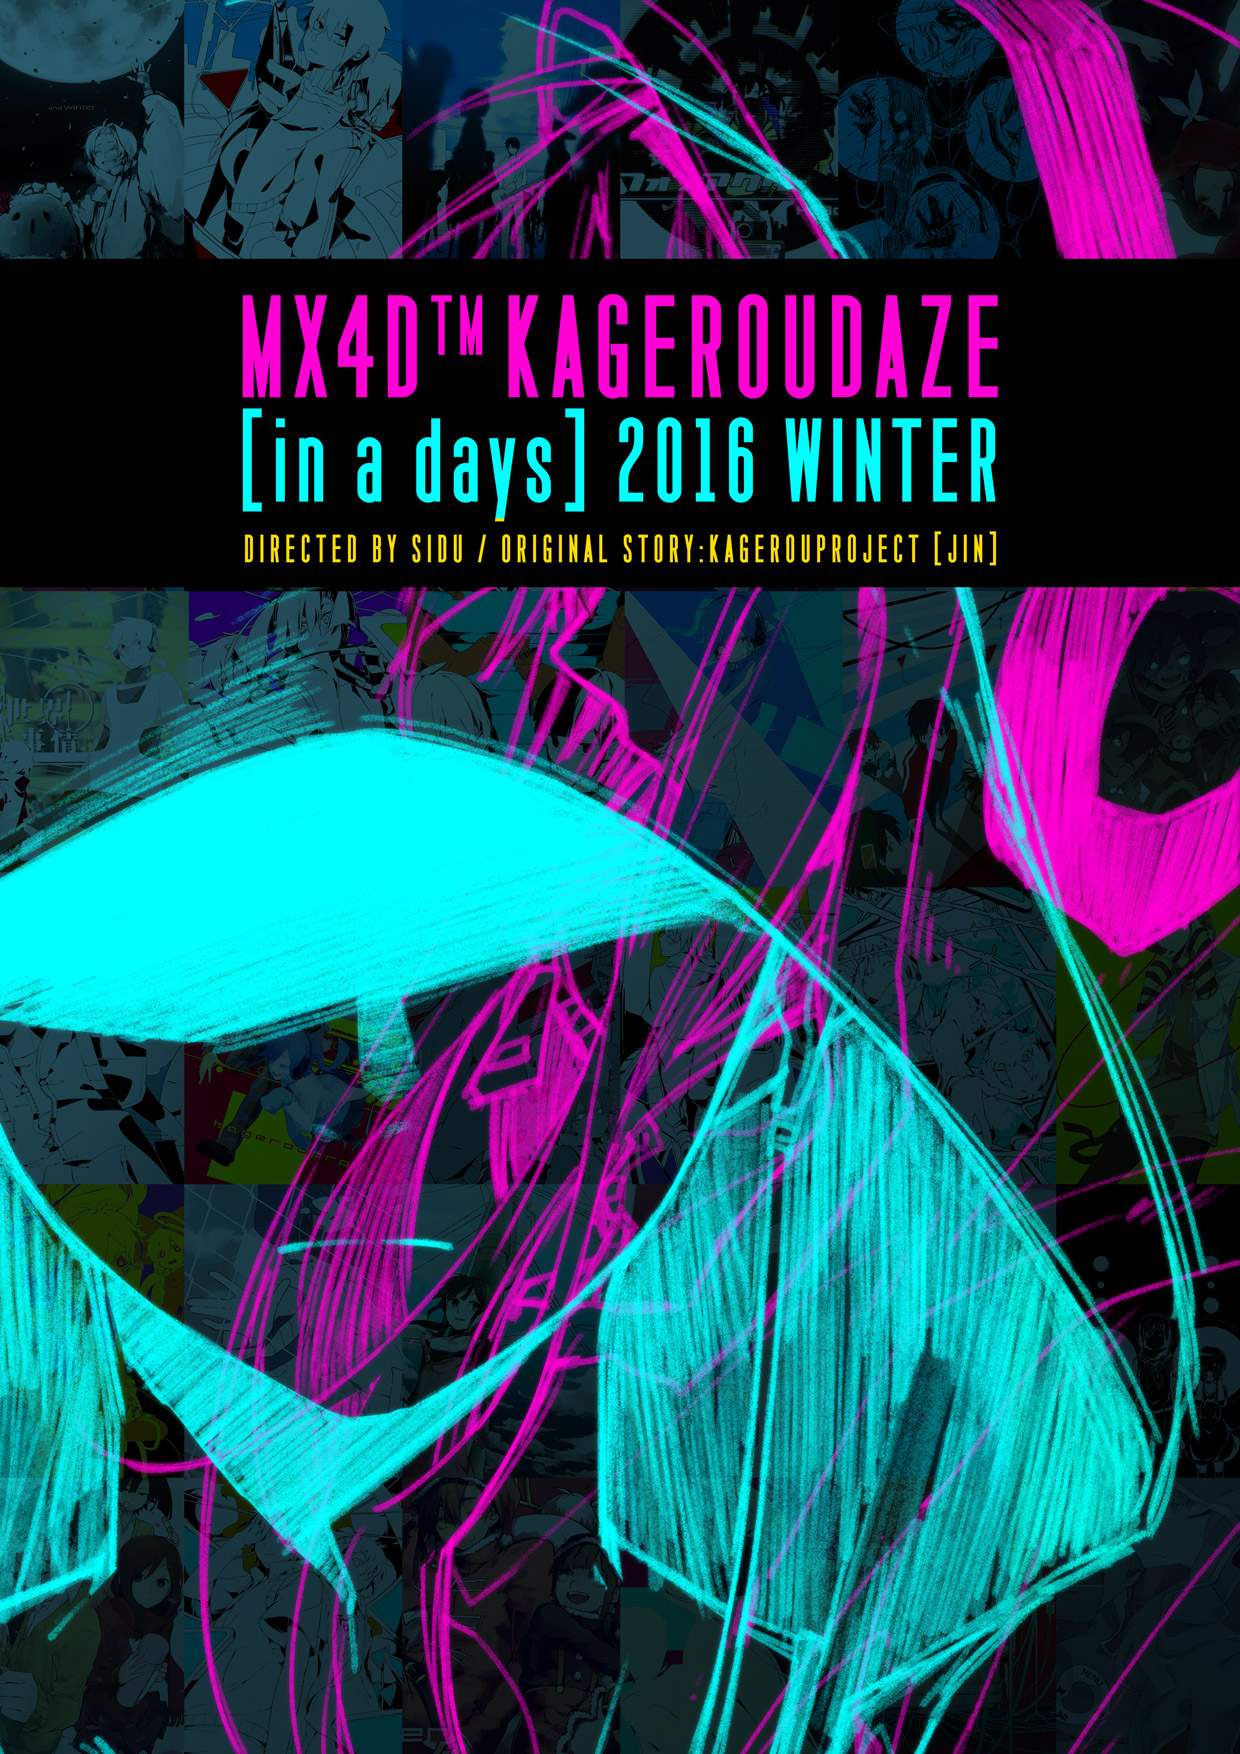 Kagerou Project to Receive Immersive MX4D Anime Short Film in Winter